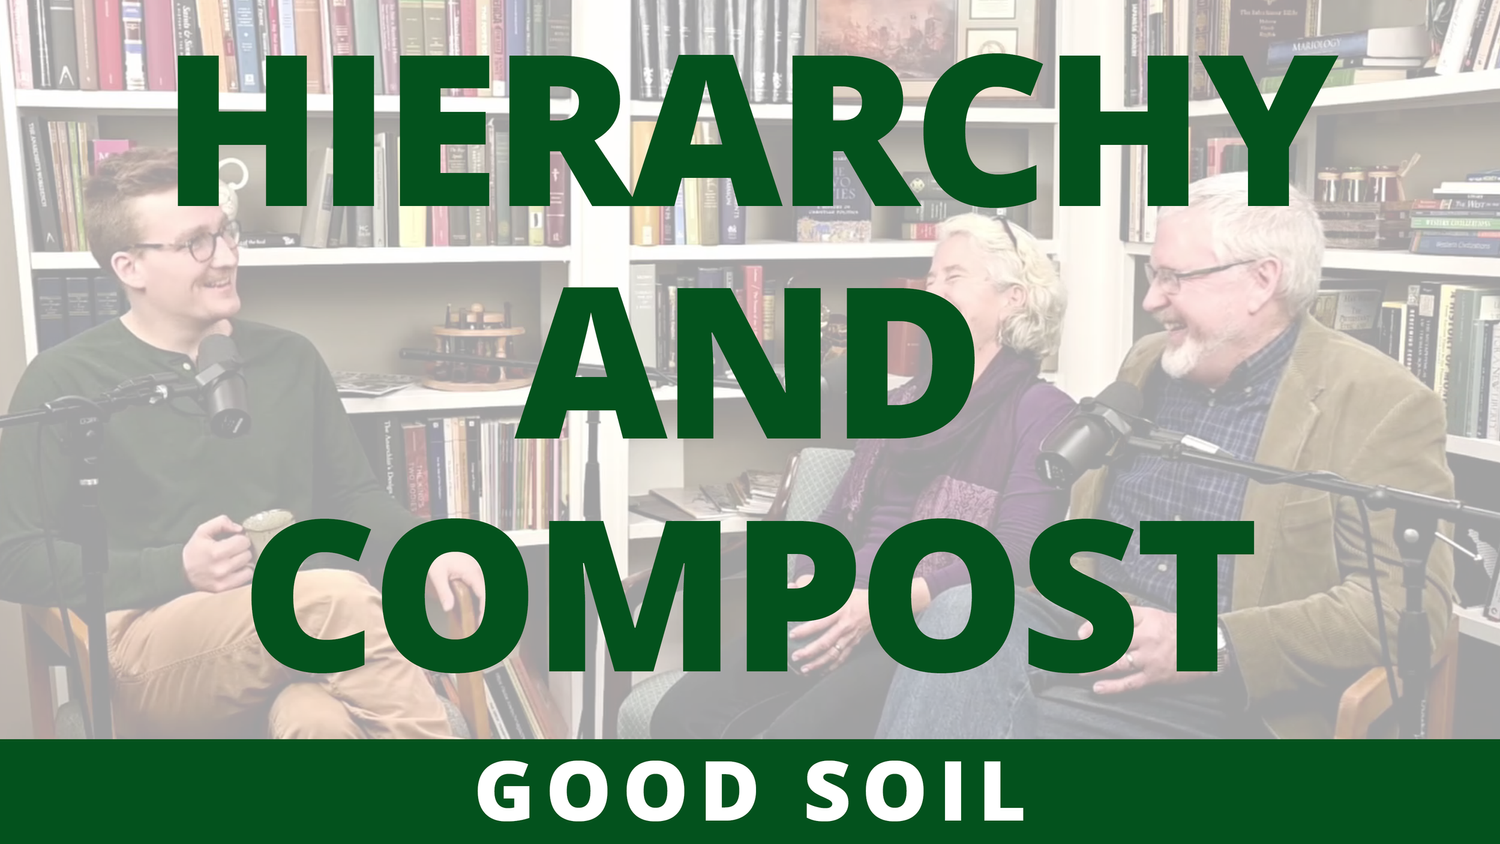 Hierarchy and Compost